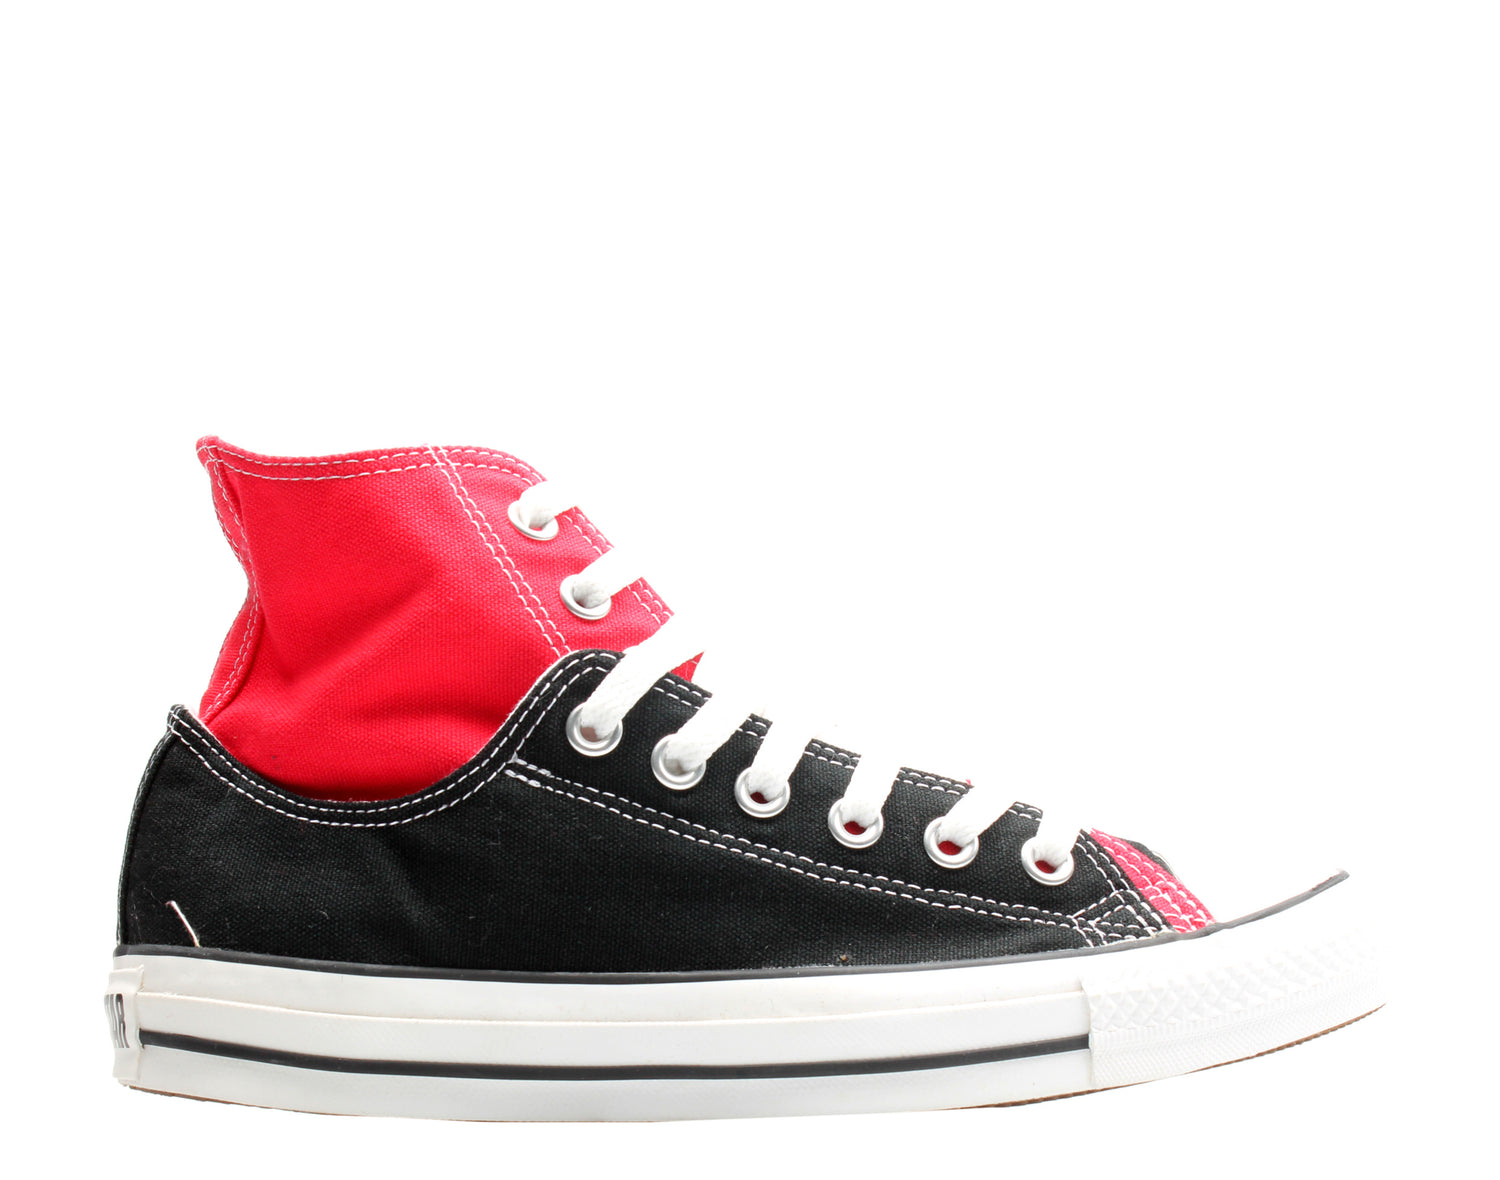 Converse Chuck Taylor All Star Layer Up Hi Sneakers